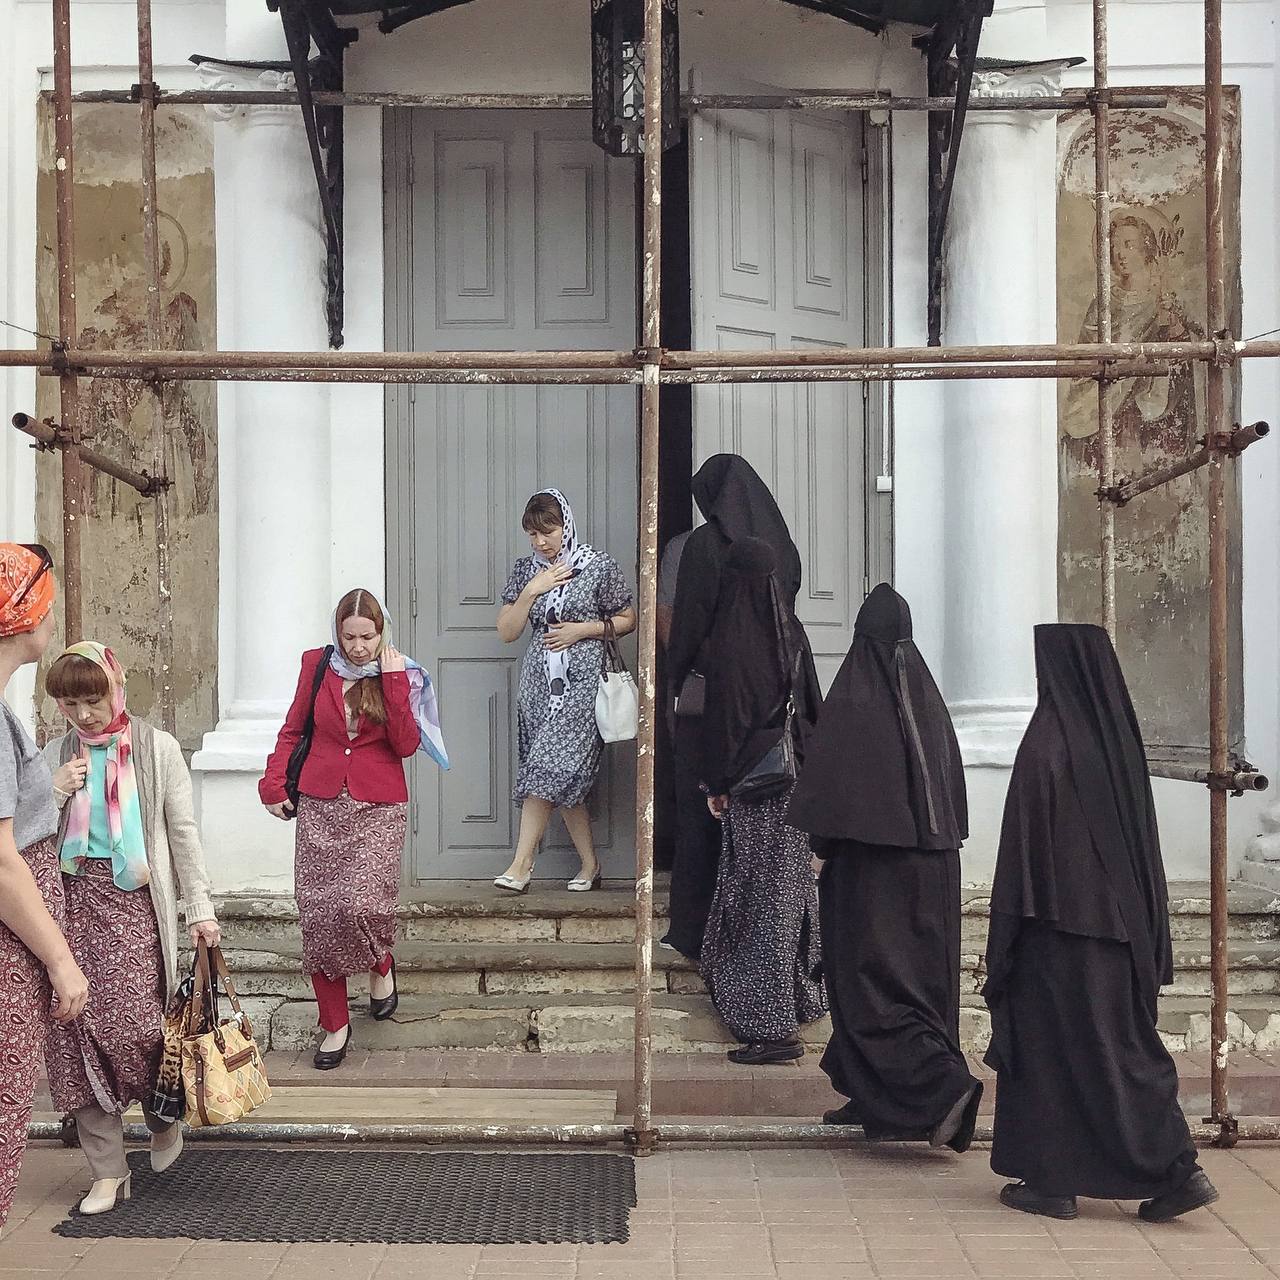 A group of nuns enters a church and a group of women leaves it